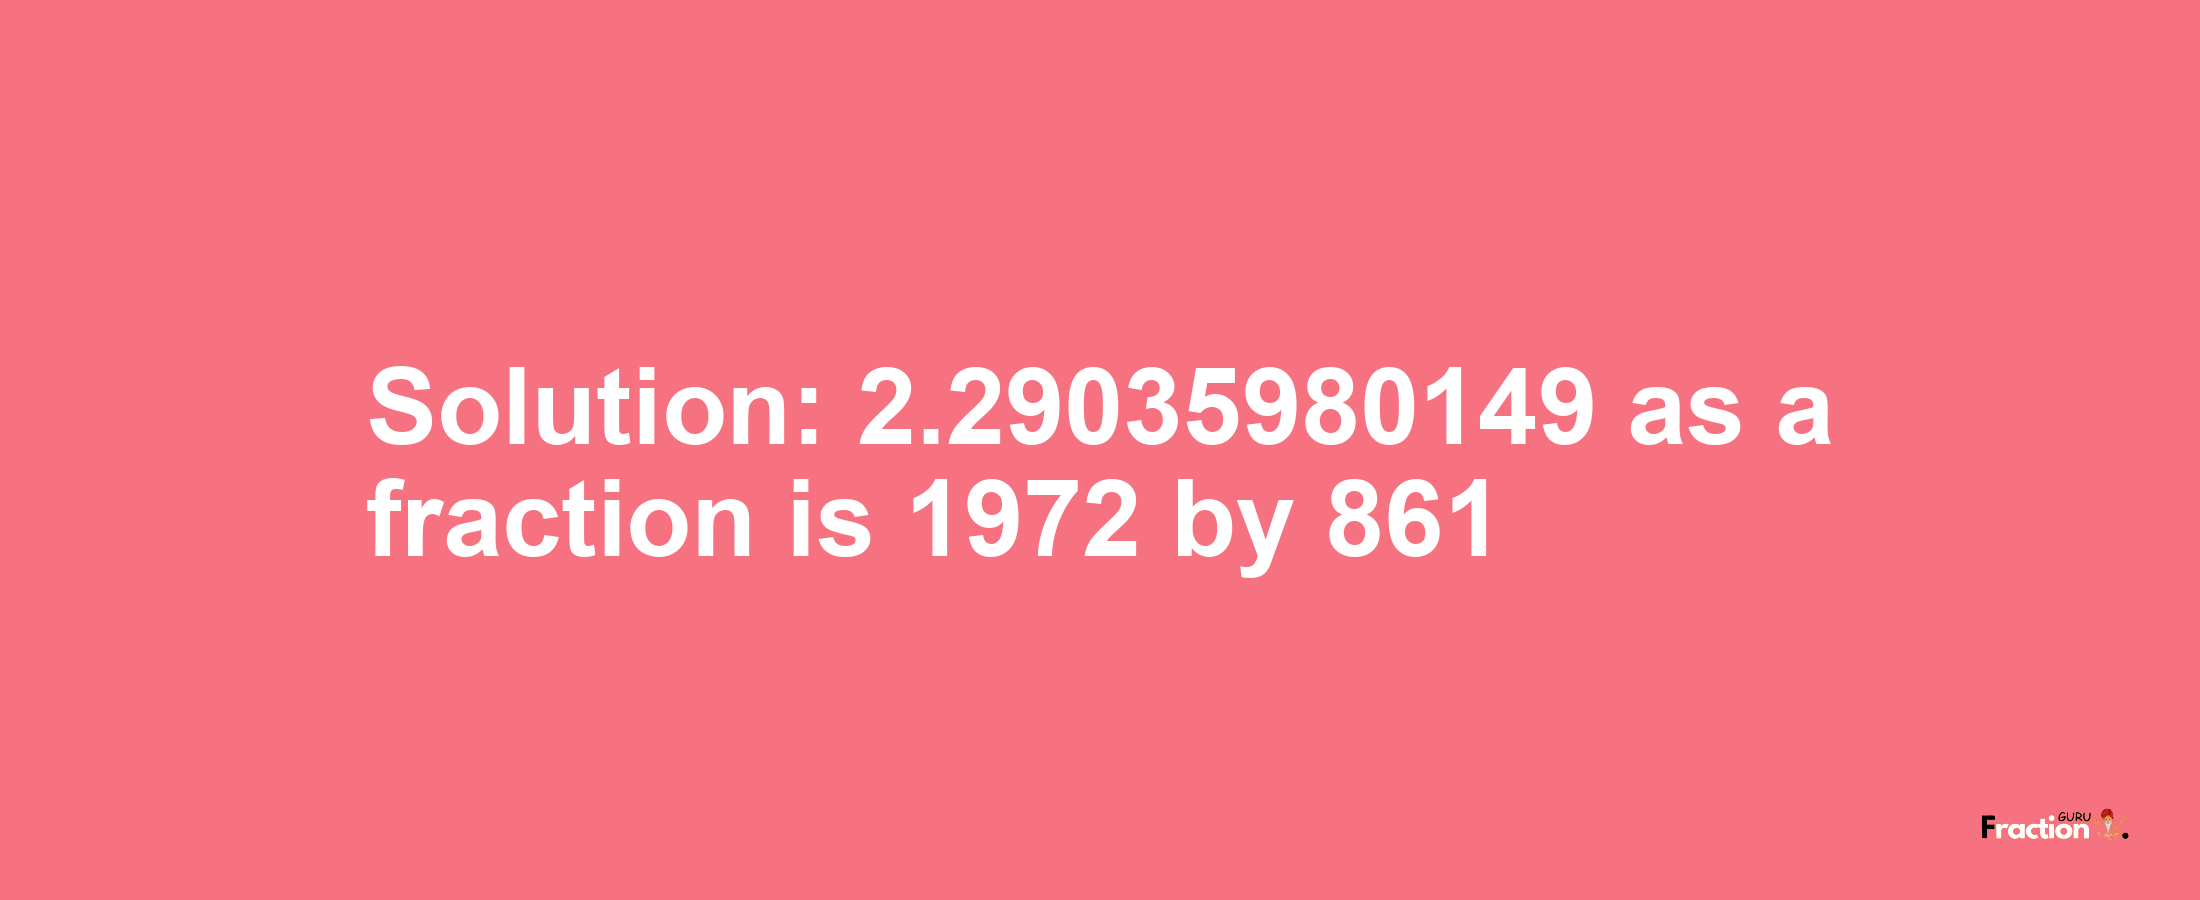 Solution:2.29035980149 as a fraction is 1972/861